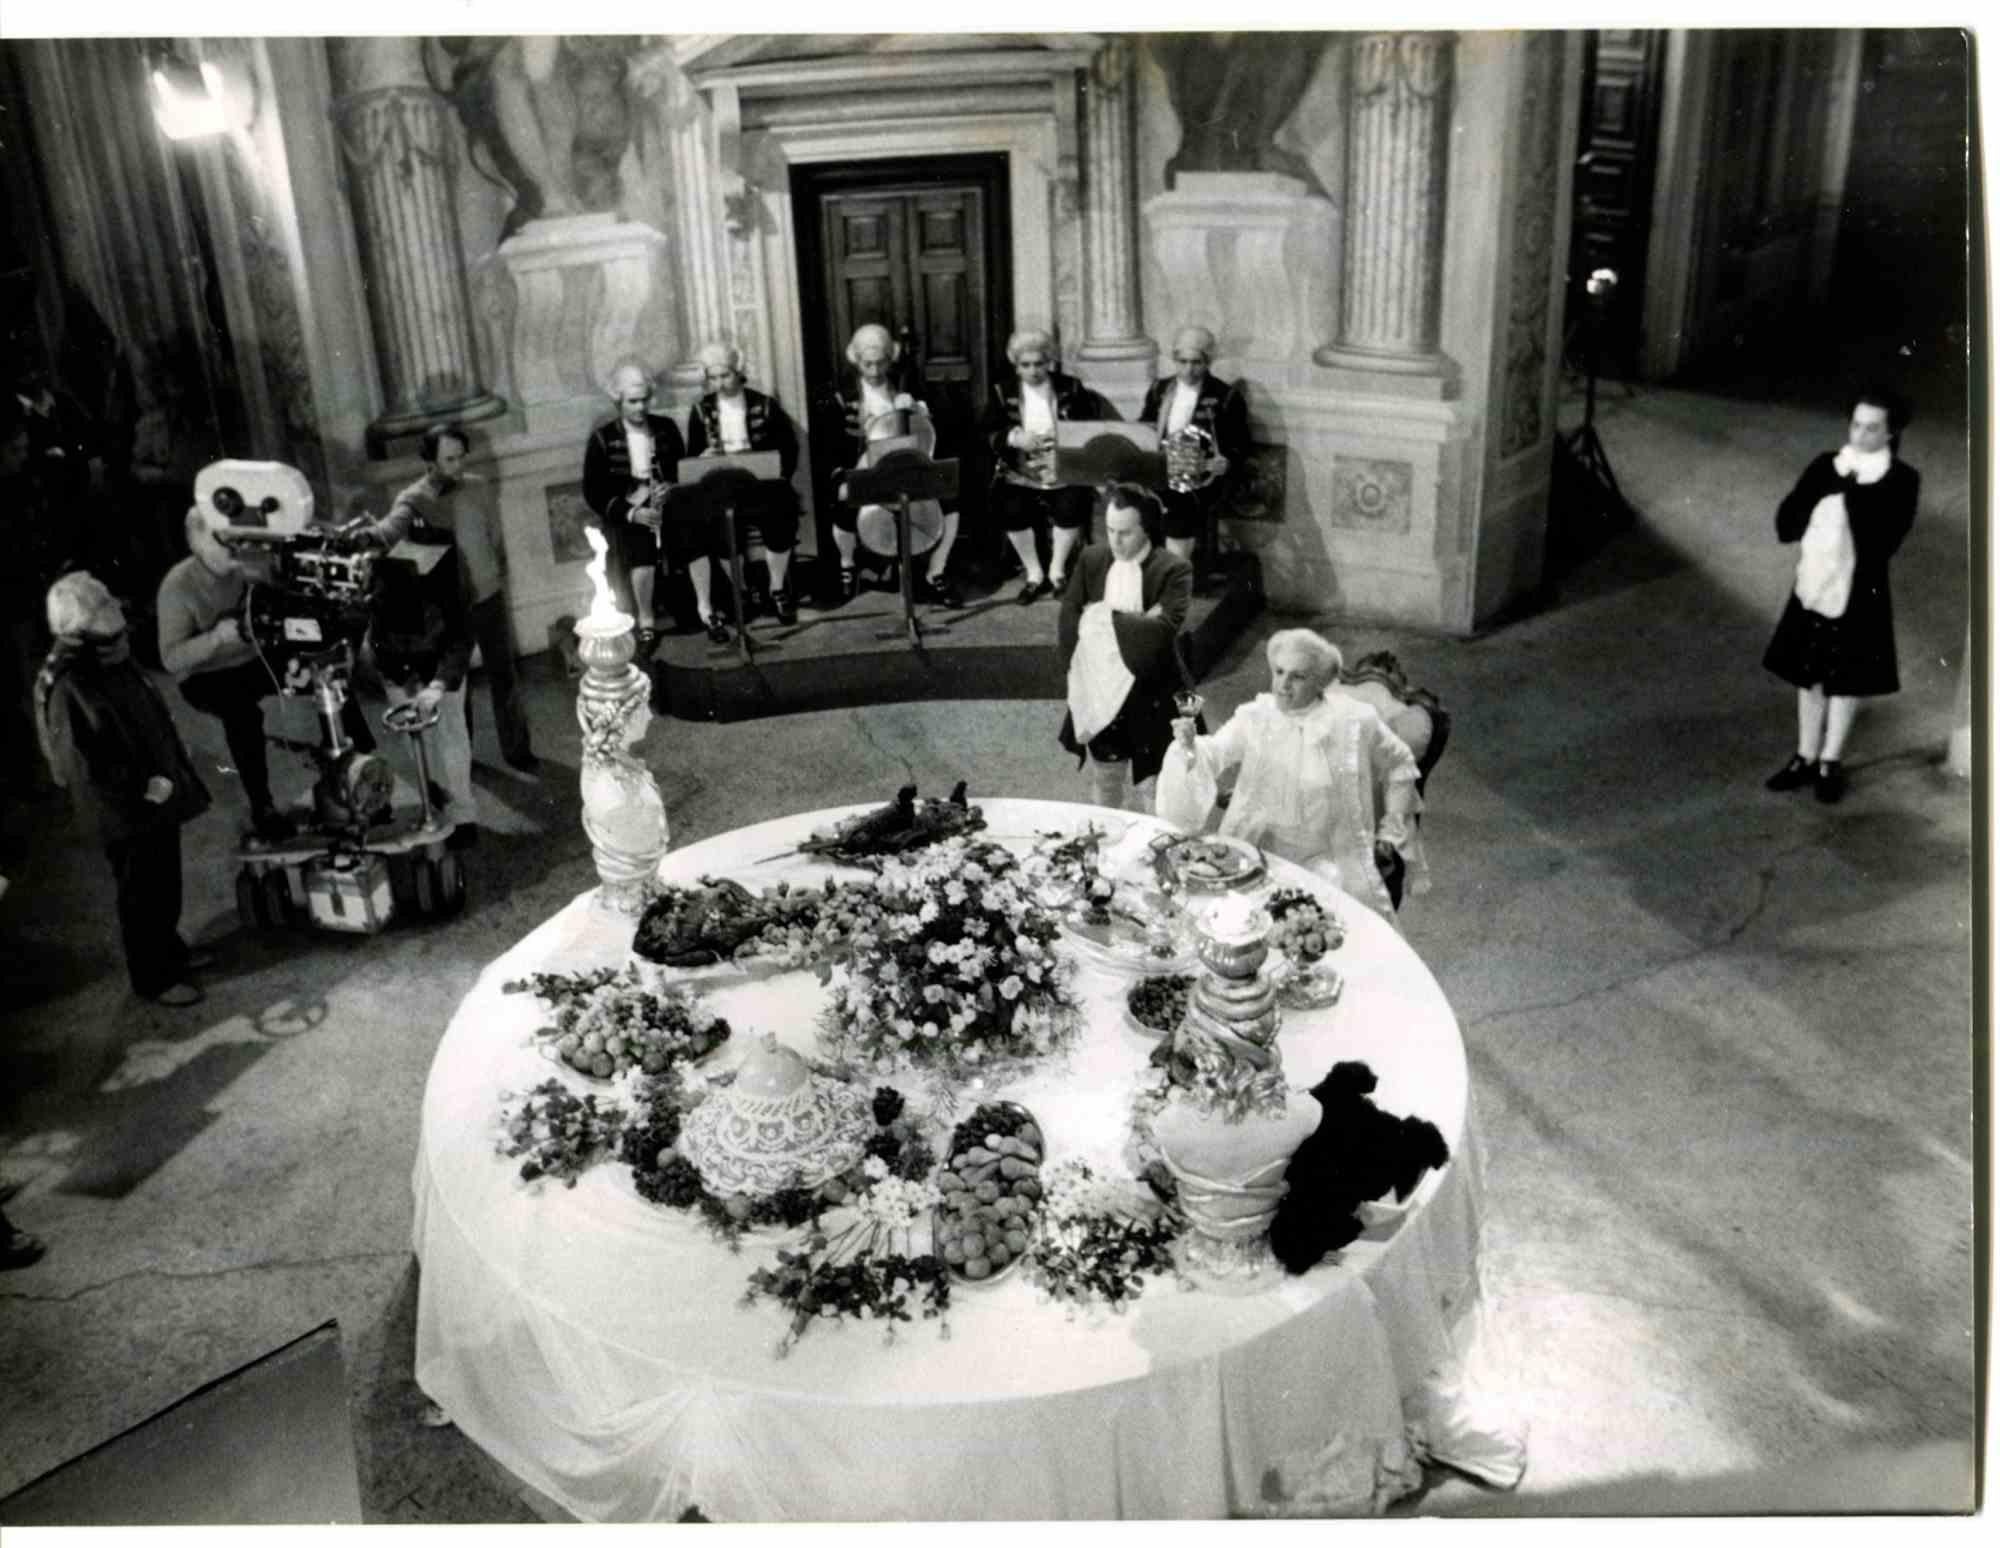 Unknown Portrait Photograph - On the Stet of "Don Giovanni" by Joseph Losey - 1979